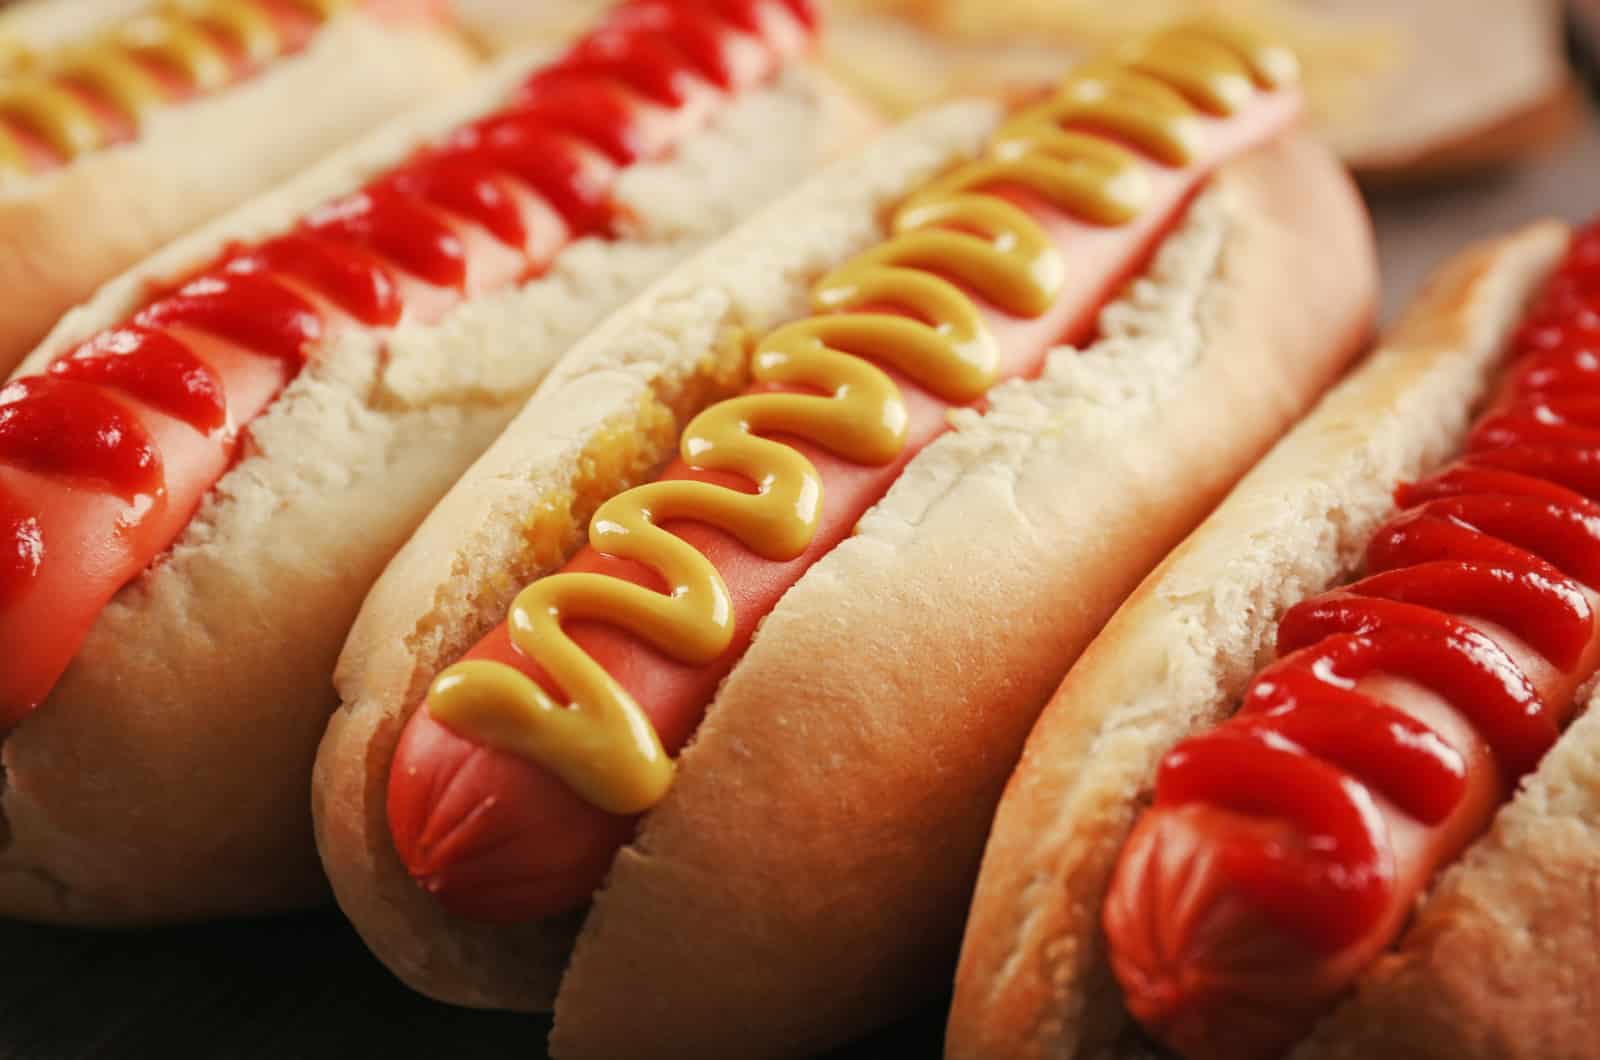 several hot dogs with sauces